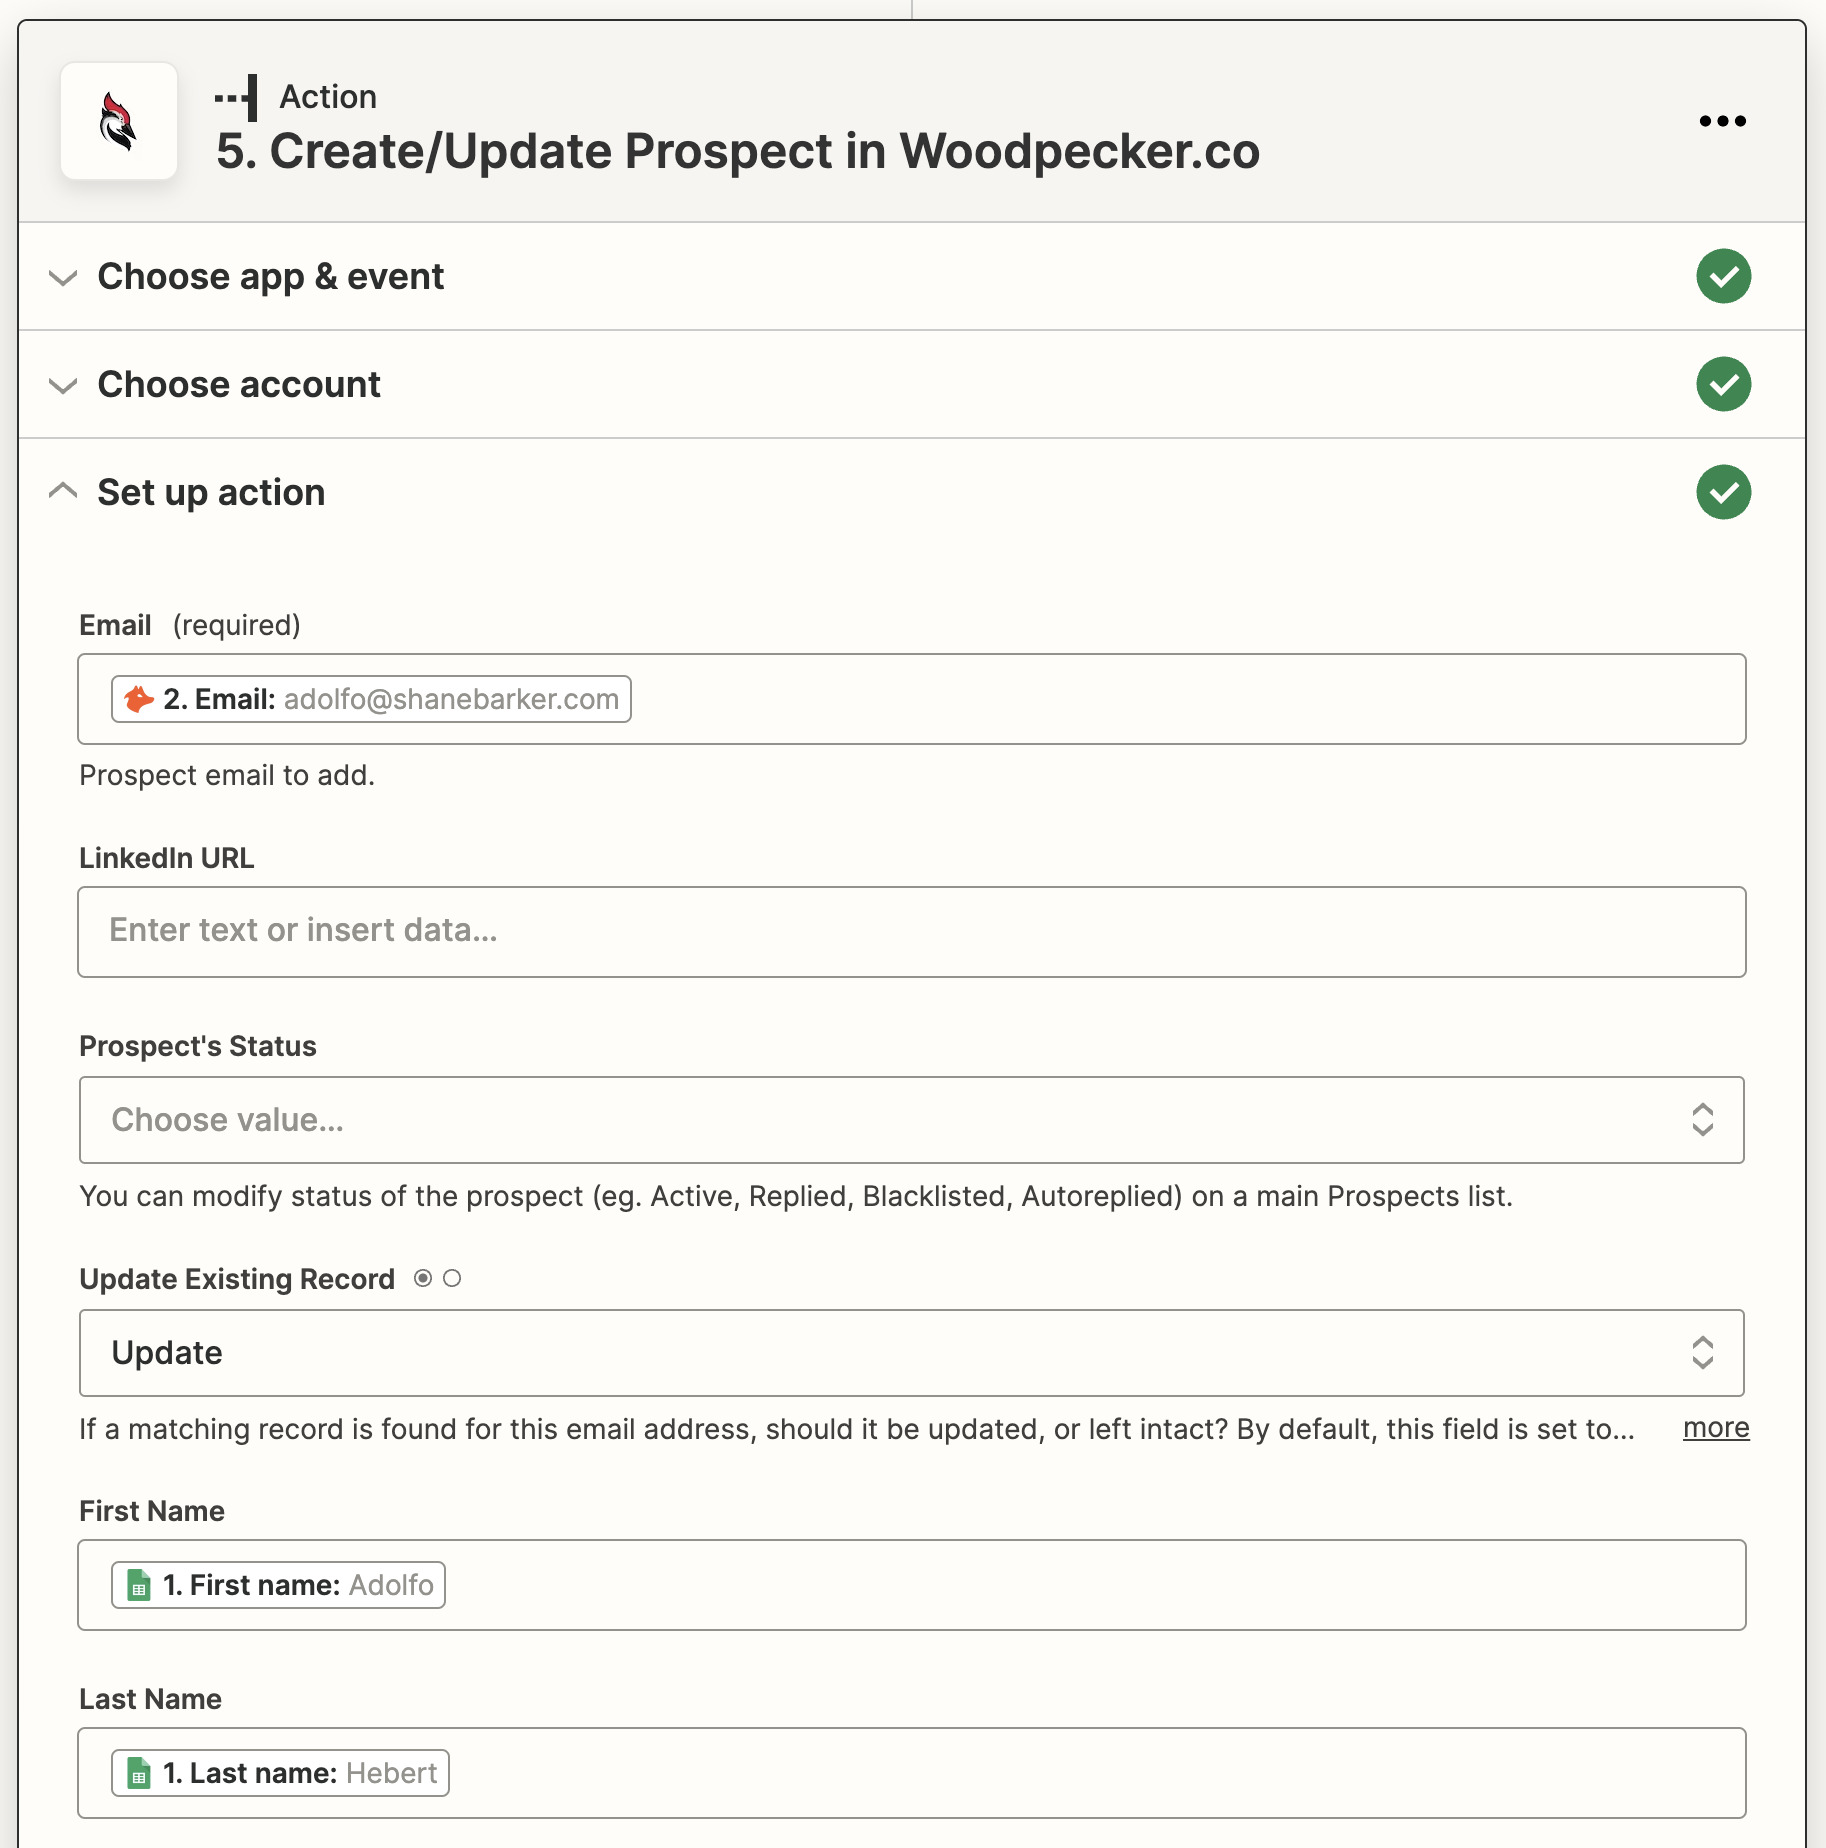 Action step: Create/Update Prospect in Woodpecker.co